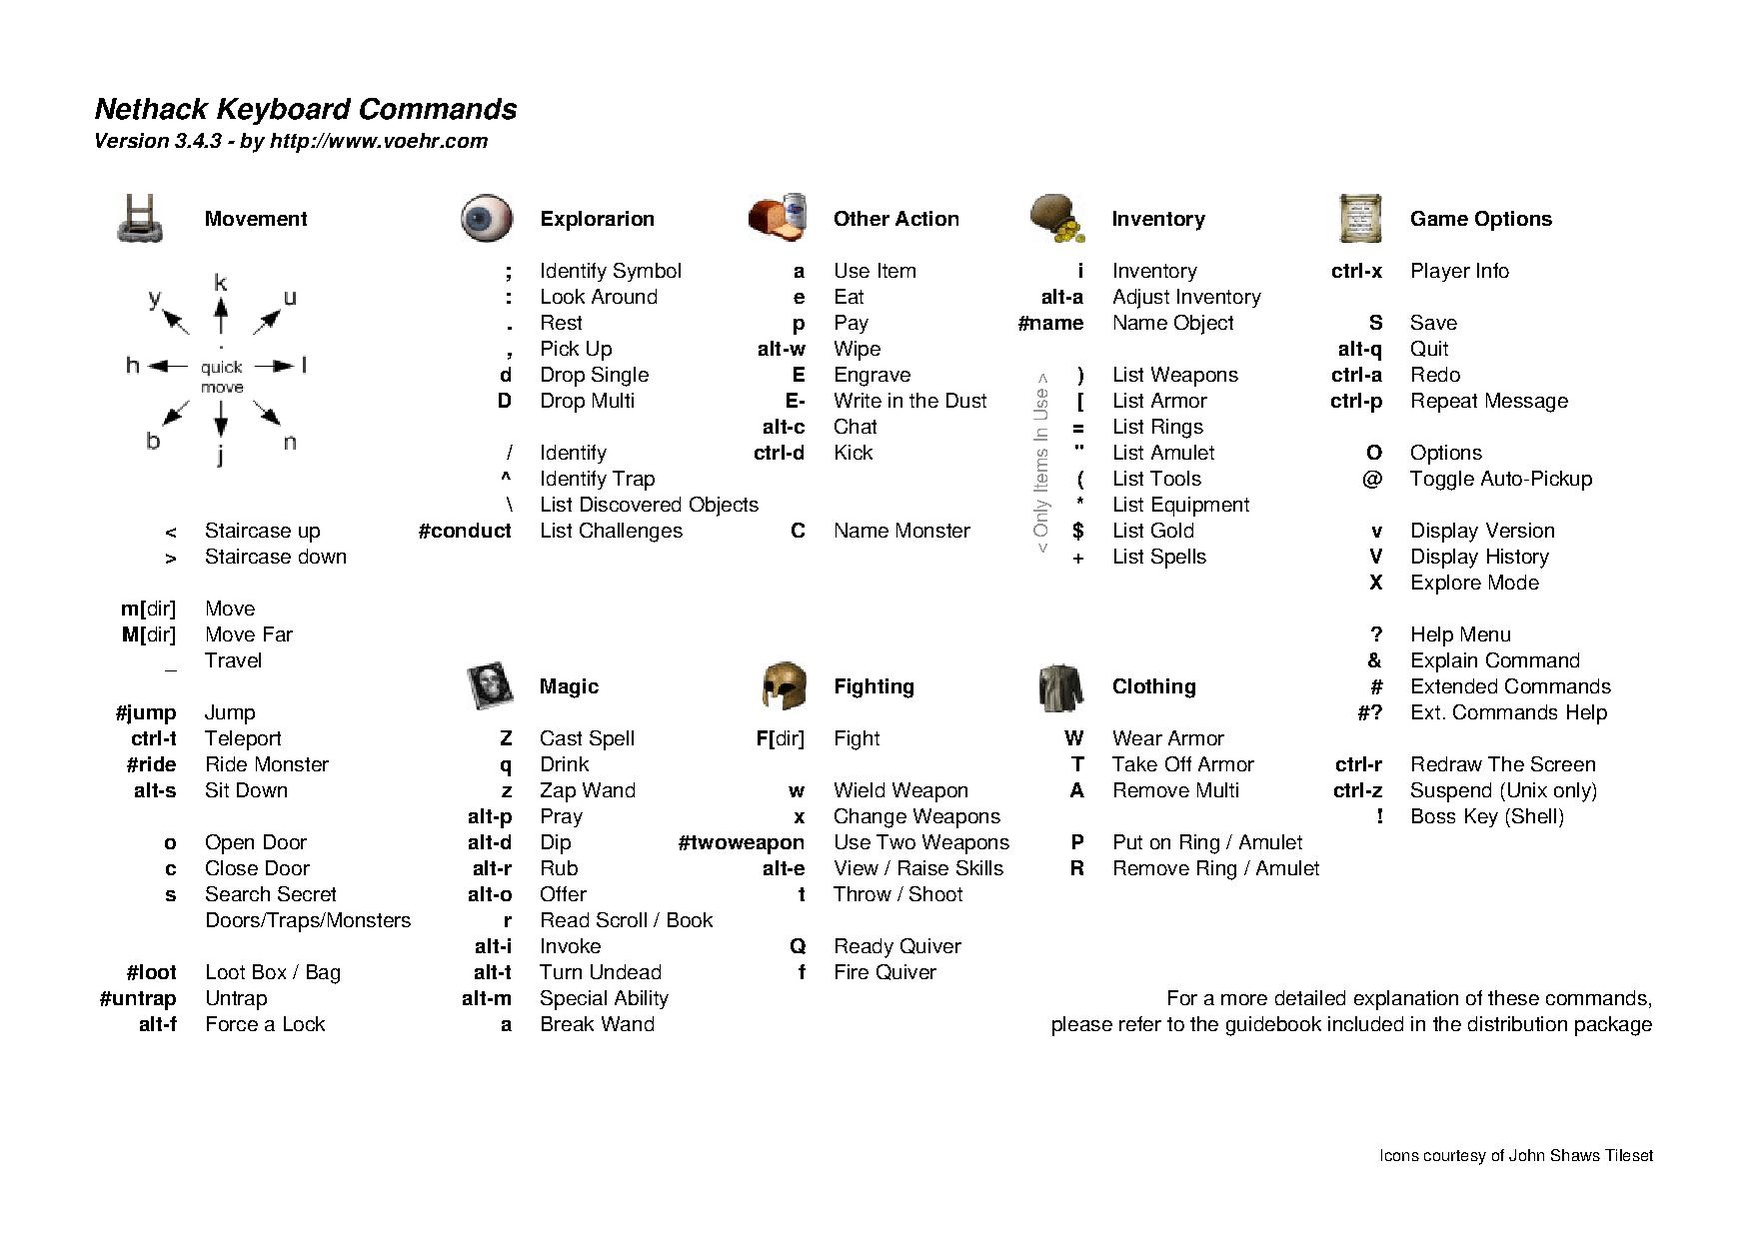 NetHack Keyboard Commands v3.4.3 by voehr.com